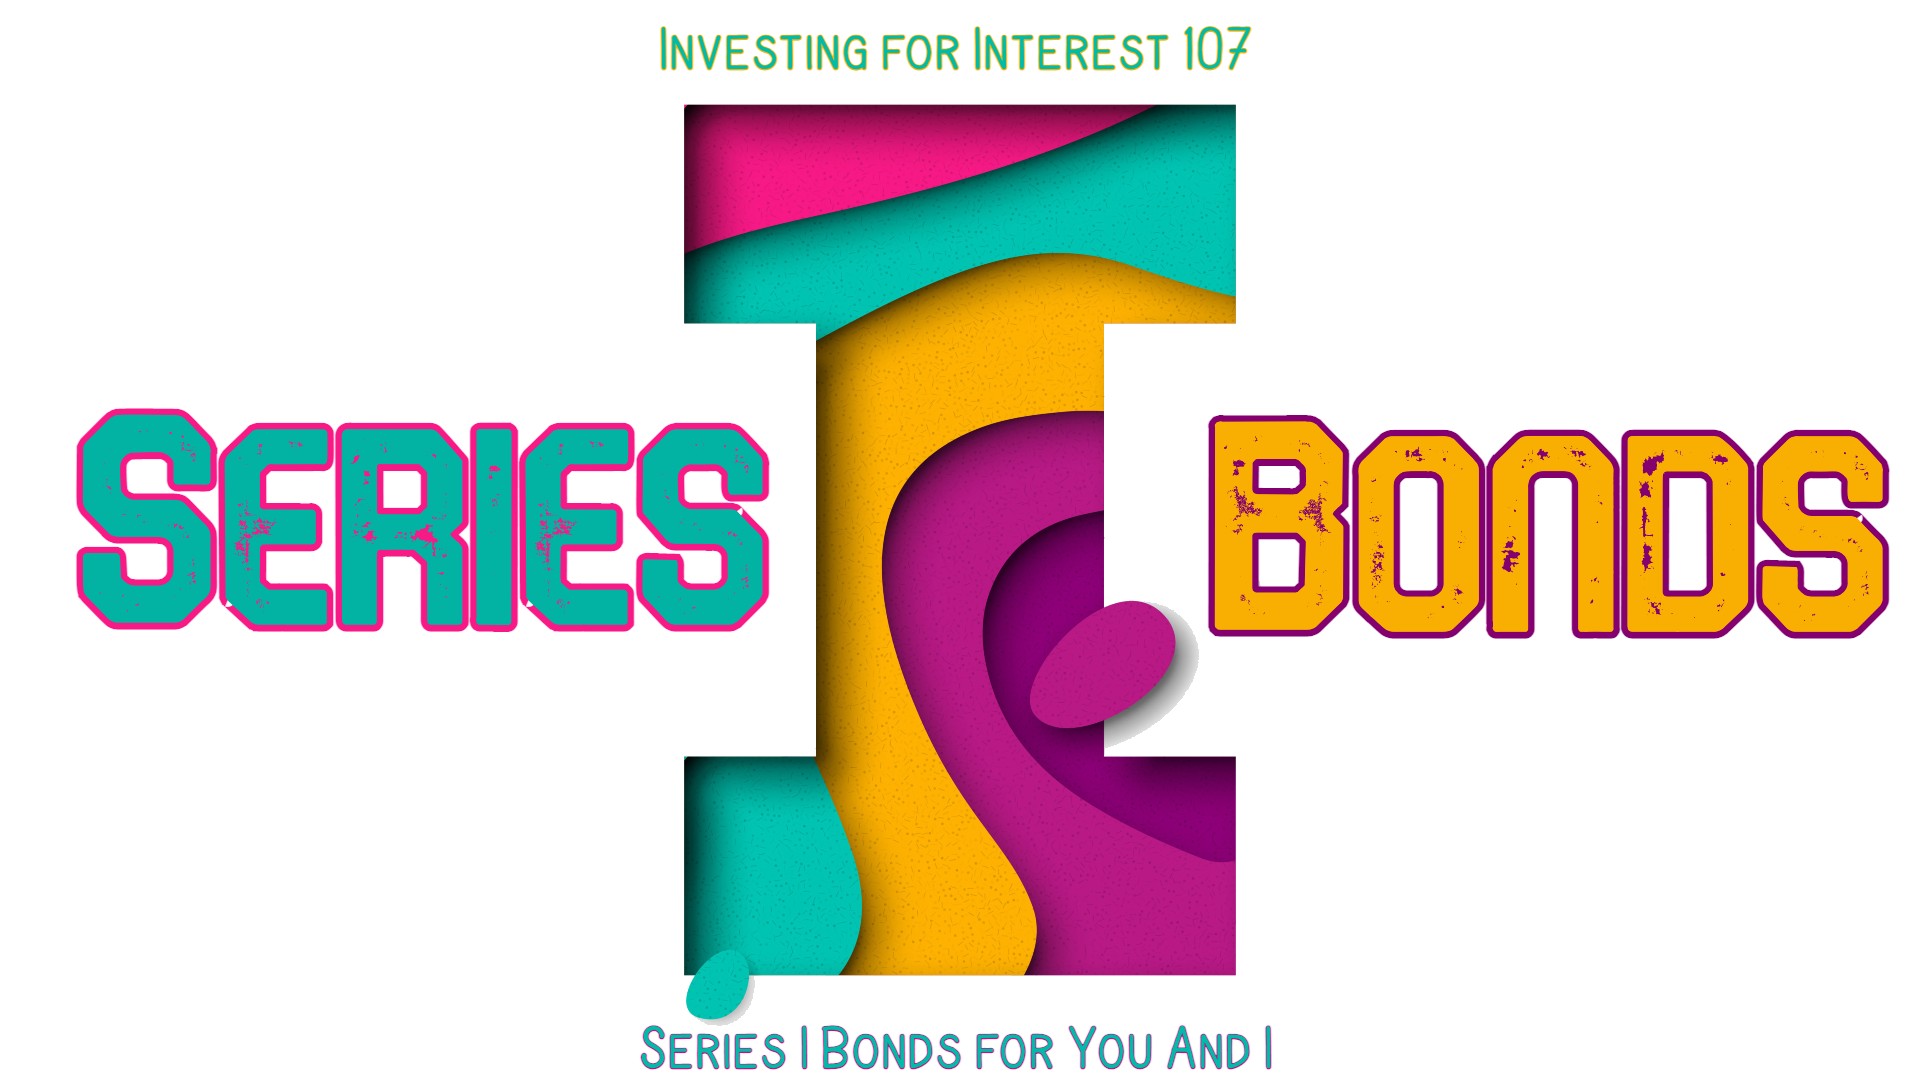 Investing for Interest 107: Series “I” Bonds For You and I